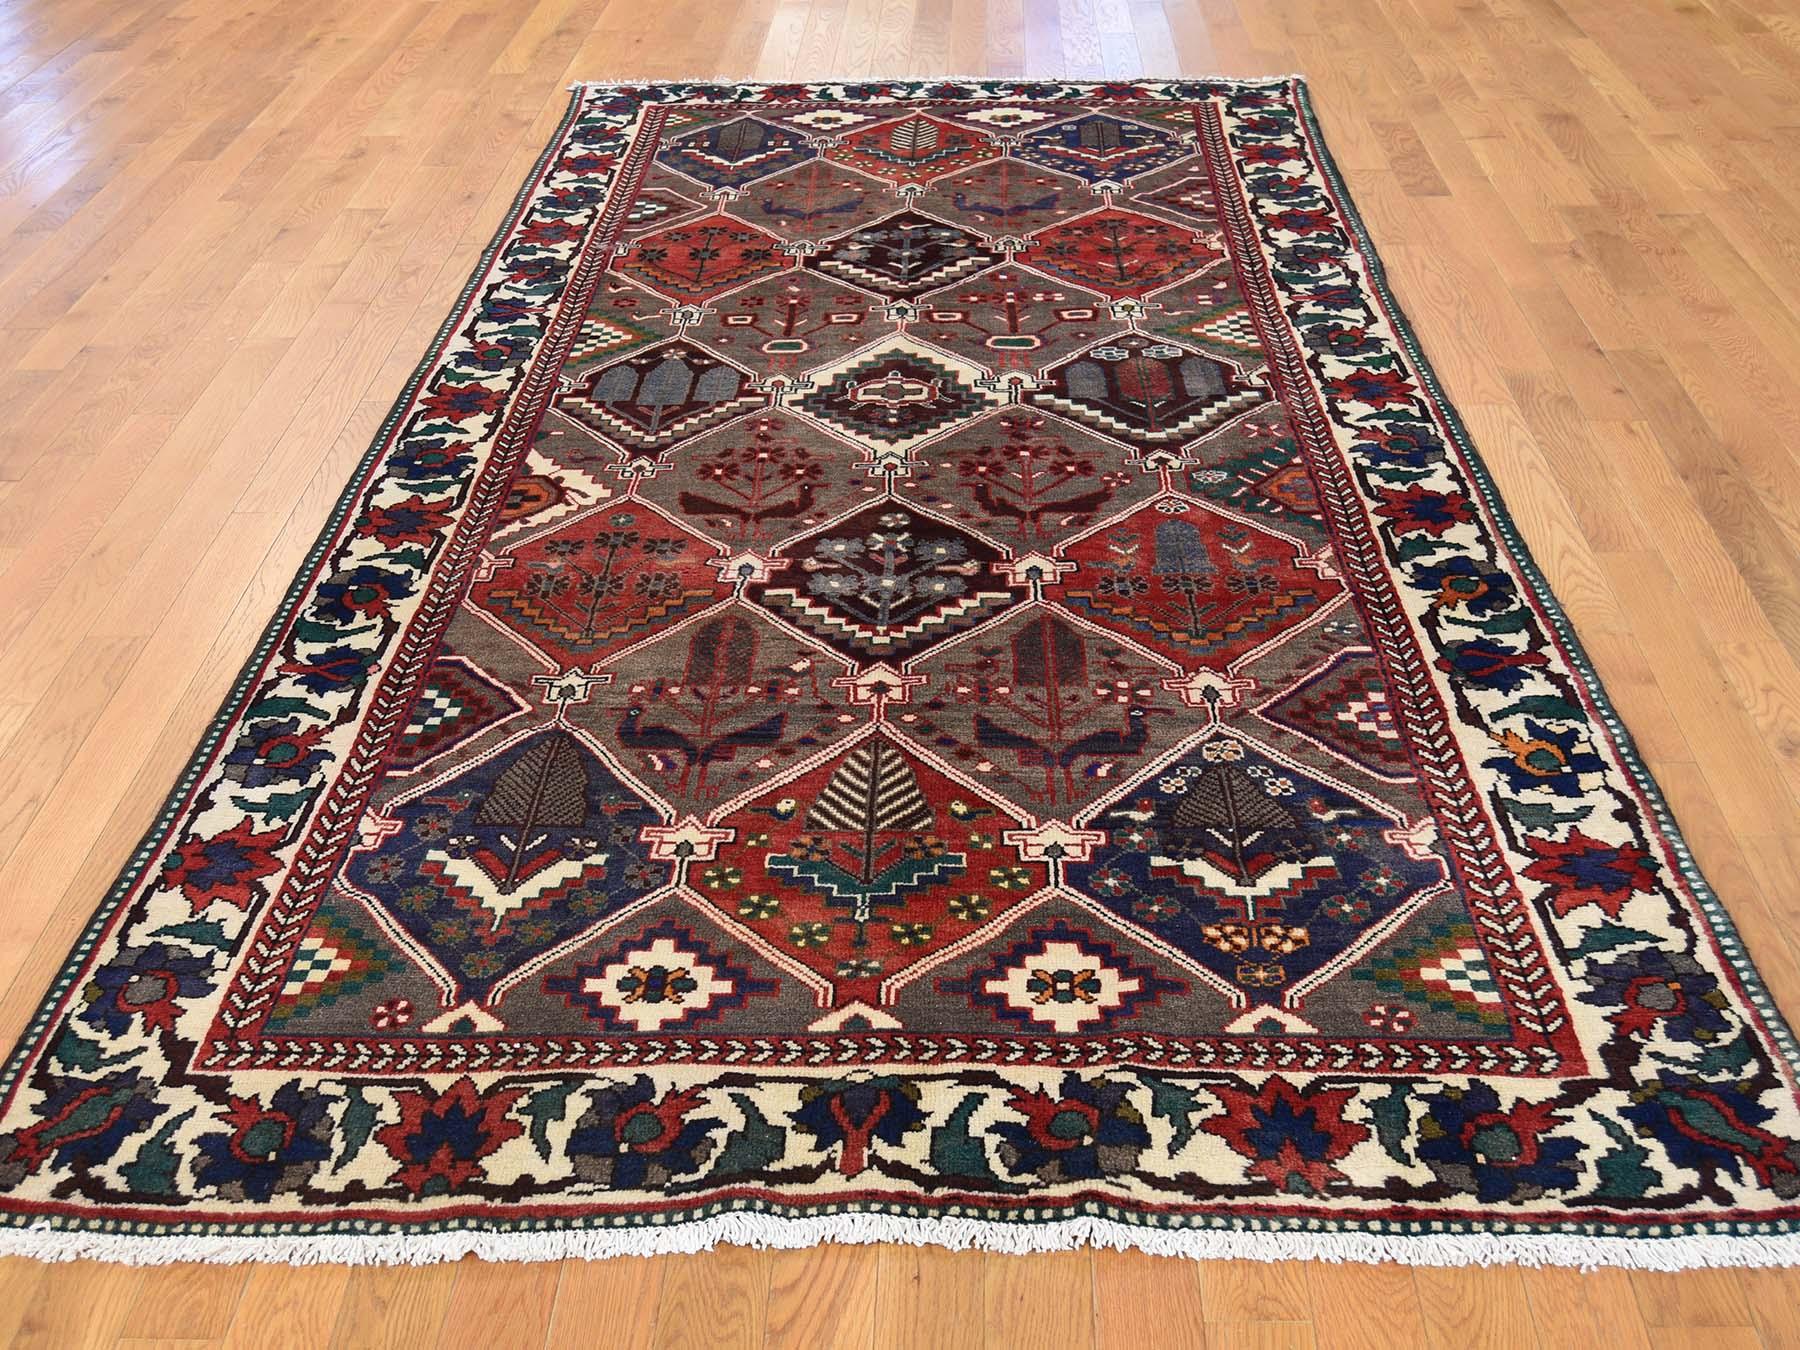 This is a truly genuine one-of-a-kind semi antique Persian Bakhtiari garden design wide runner rug. It has been knotted for months and months in the centuries-old Persian weaving craftsmanship techniques by expert artisans.

Primary materials: